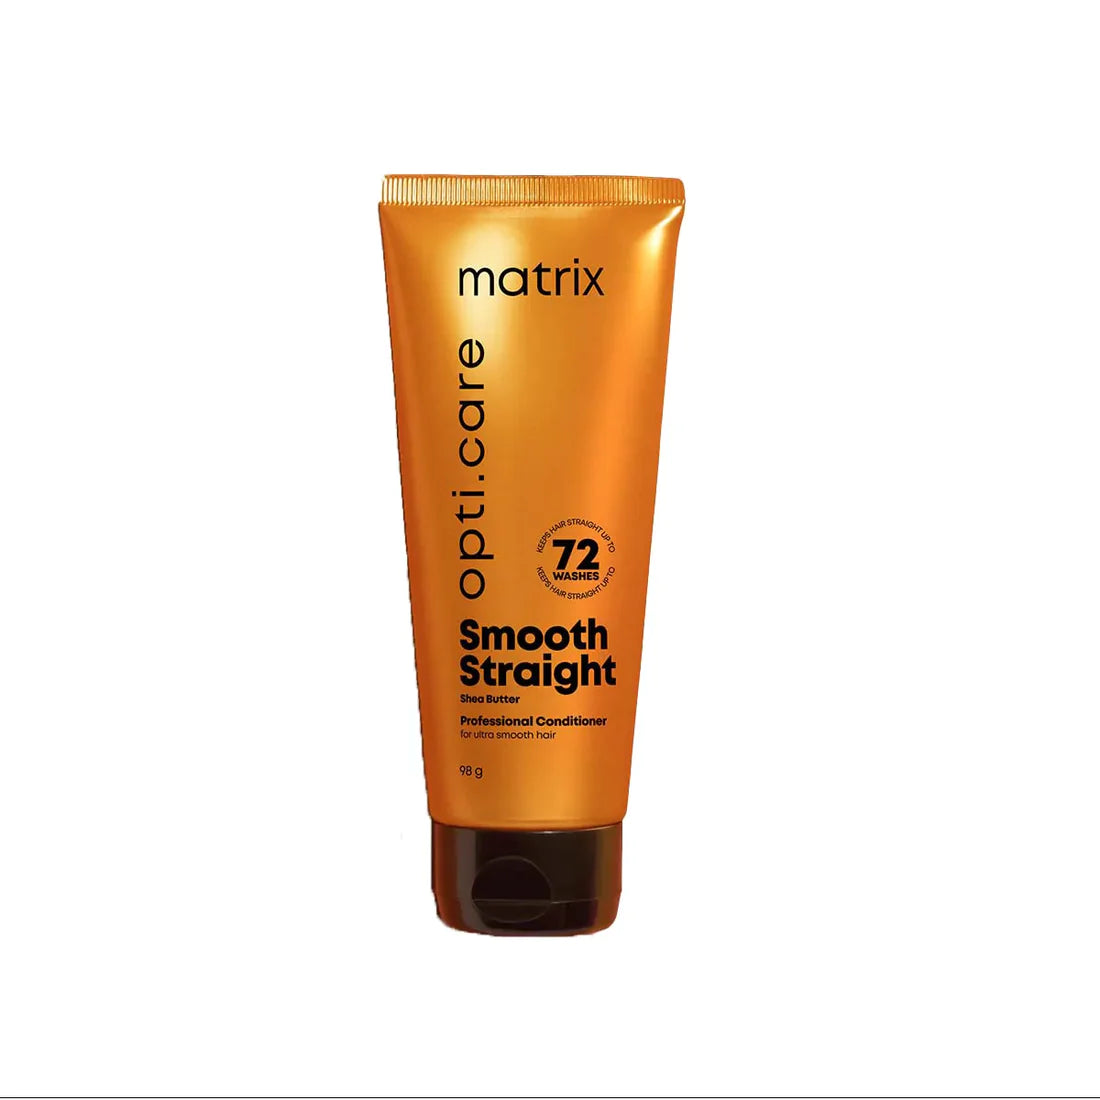 Matrix Opti Care Smooth Straight Professional Conditioner with Shea Butte (196g)